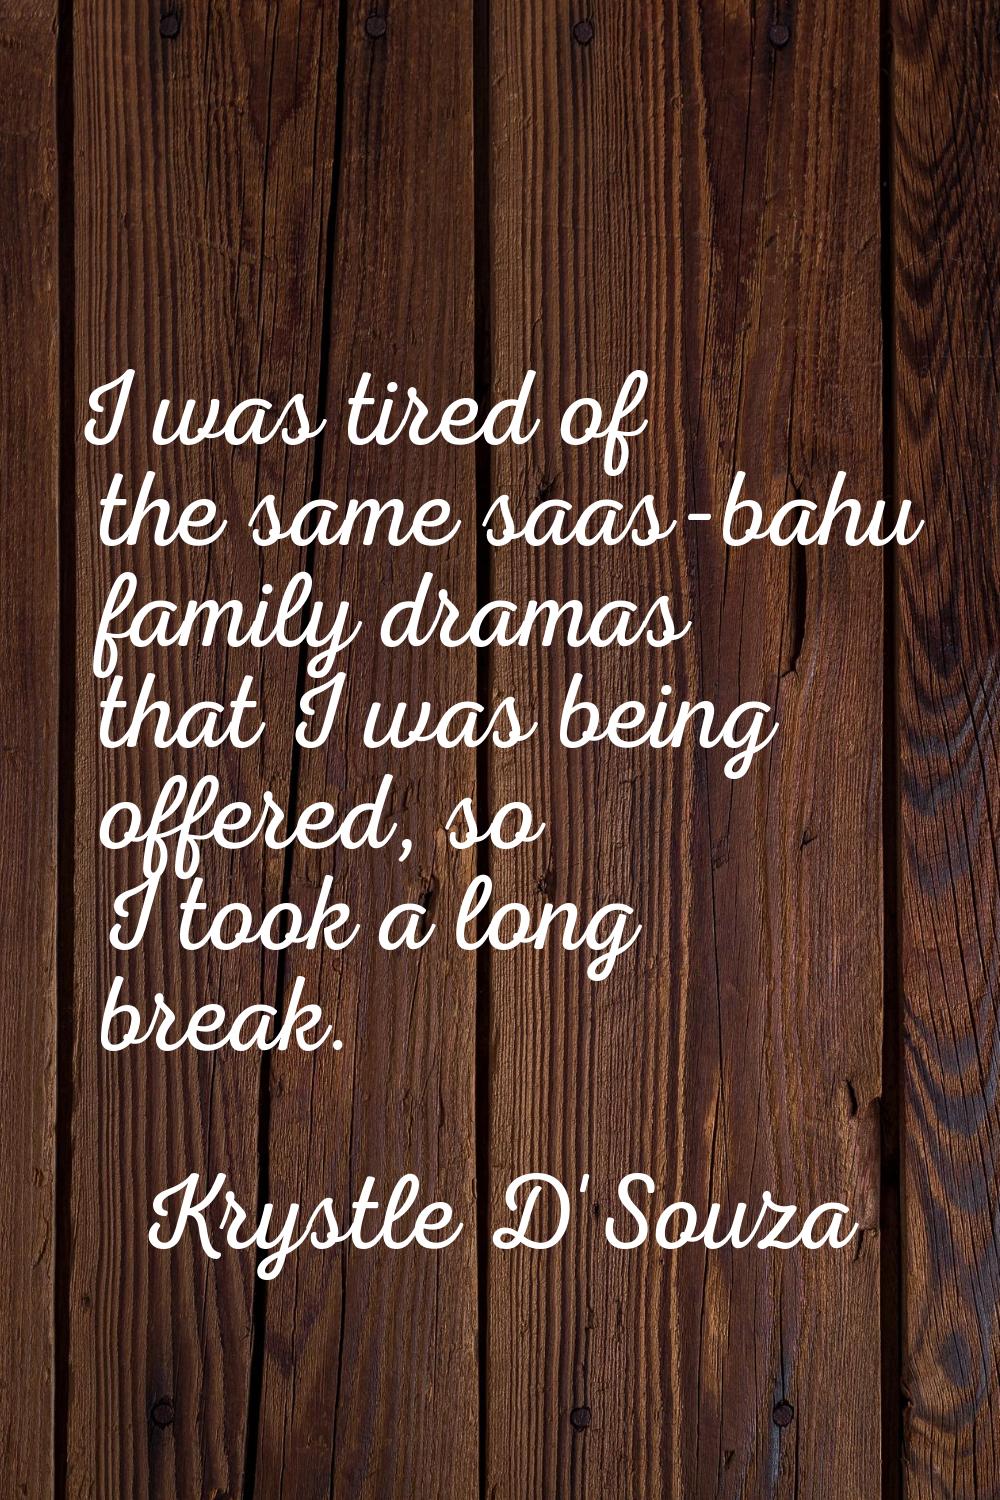 I was tired of the same saas-bahu family dramas that I was being offered, so I took a long break.